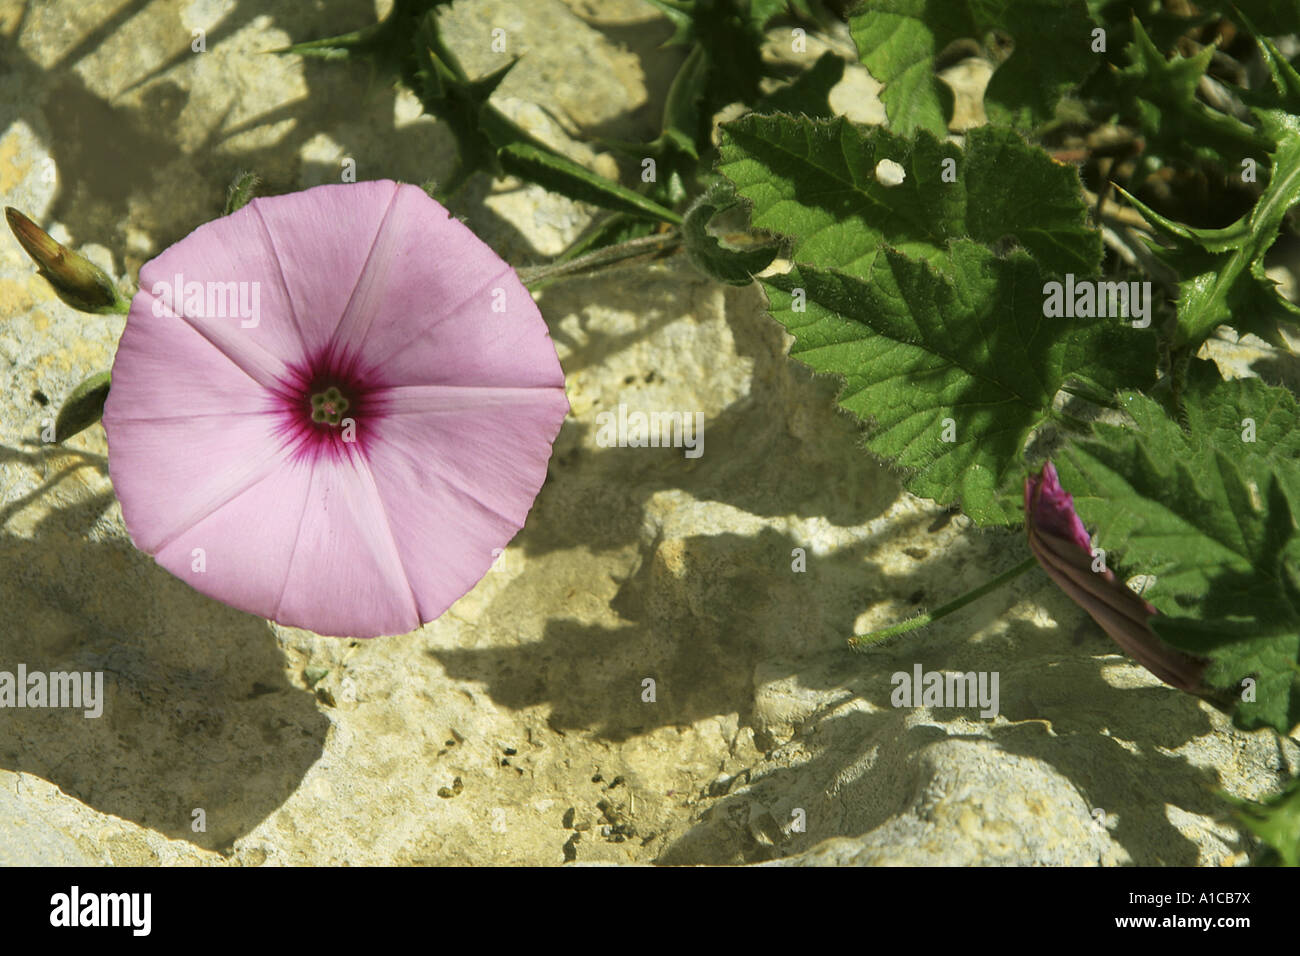 Mallow leaved bindweed, Mallow-leaved bindweed (Convolvulus althaeoides), blooming plant Stock Photo